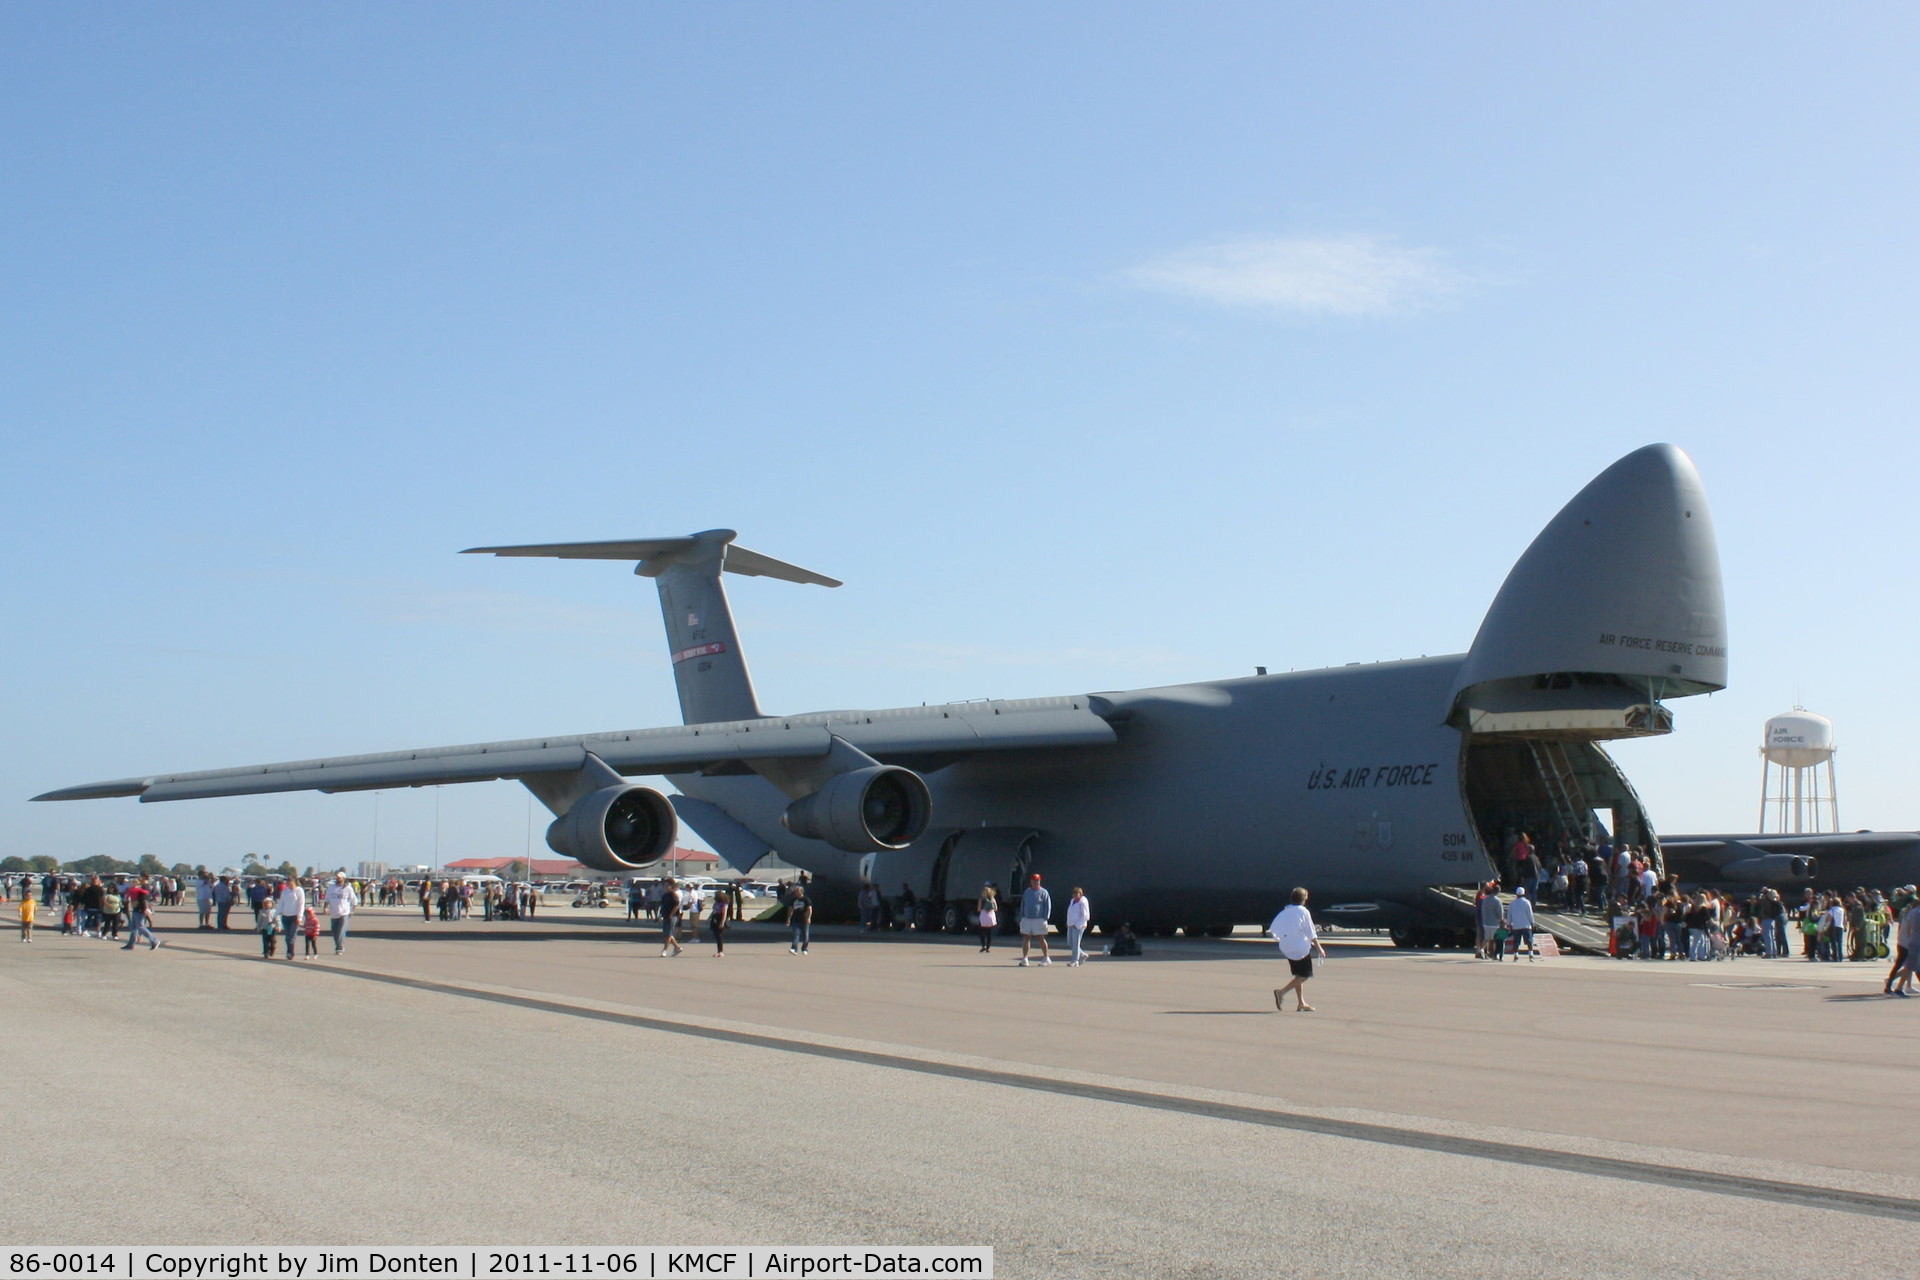 86-0014, 1986 Lockheed C-5B Galaxy C/N 500-0100, C-5 Galaxy (86-0014) of the 439th Airlift Wing at Westover Air Reserve Base on display at MacDill Air Fest